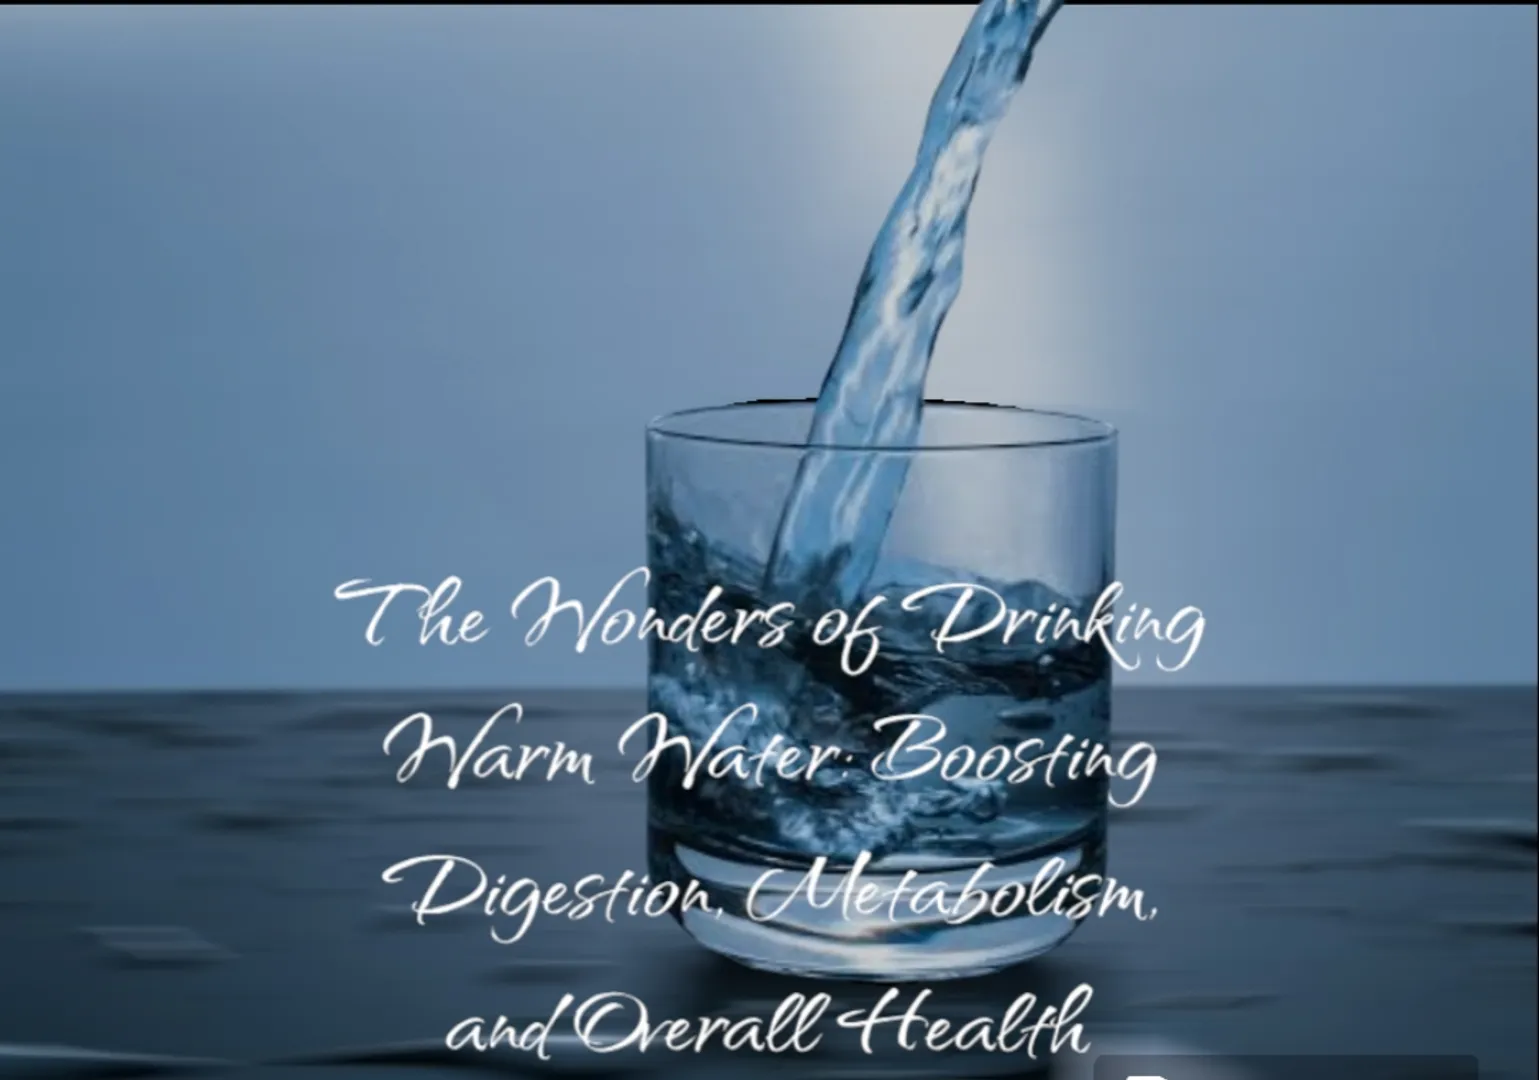 In this post, we've explored the remarkable benefits of drinking warm water for digestion, metabolism, and overall health. Warm water aids digestion by improving blood circulation, relaxing digestive muscles, and aiding in the breakdown of food. It also boosts metabolism through its thermogenic effect and supports detoxification. Additionally, warm water offers benefits such as pain relief, stress reduction, and improved hydration. While cold water is refreshing, incorporating warm water into your daily routine can be a simple yet powerful way to enhance your well-being. So, consider starting your day with a glass of warm water to reap these health rewards.